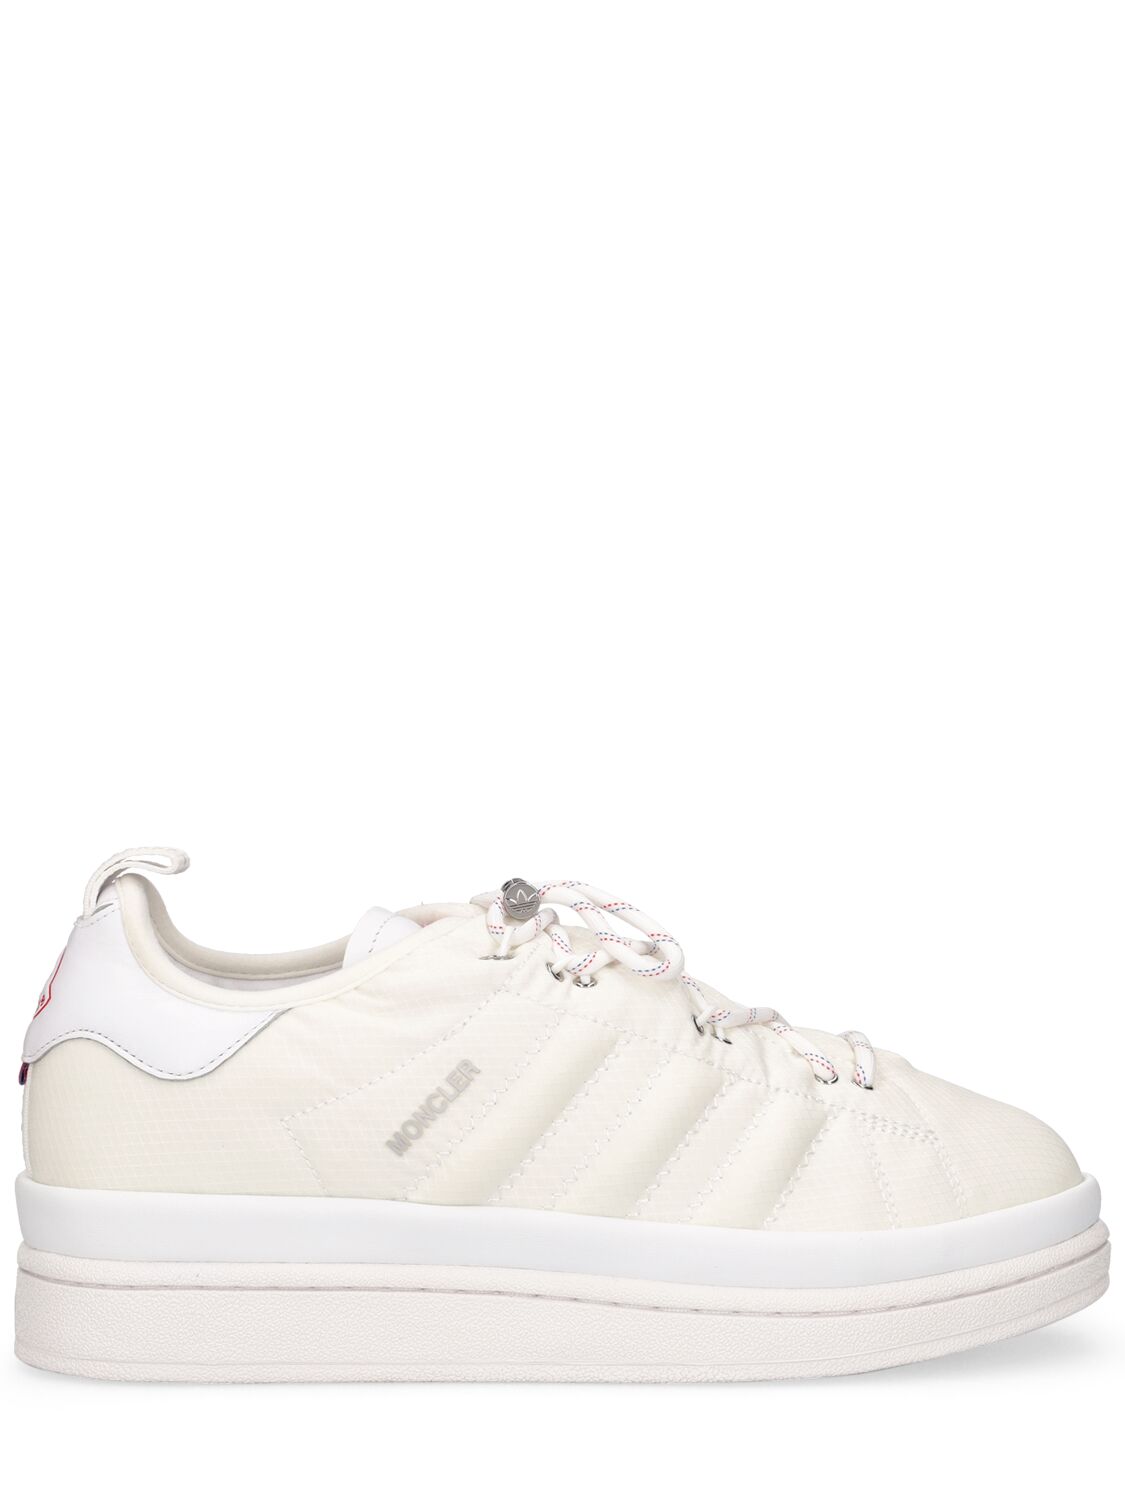 Moncler Genius Moncler X Adidas Campus Leather Trainers In Optic White